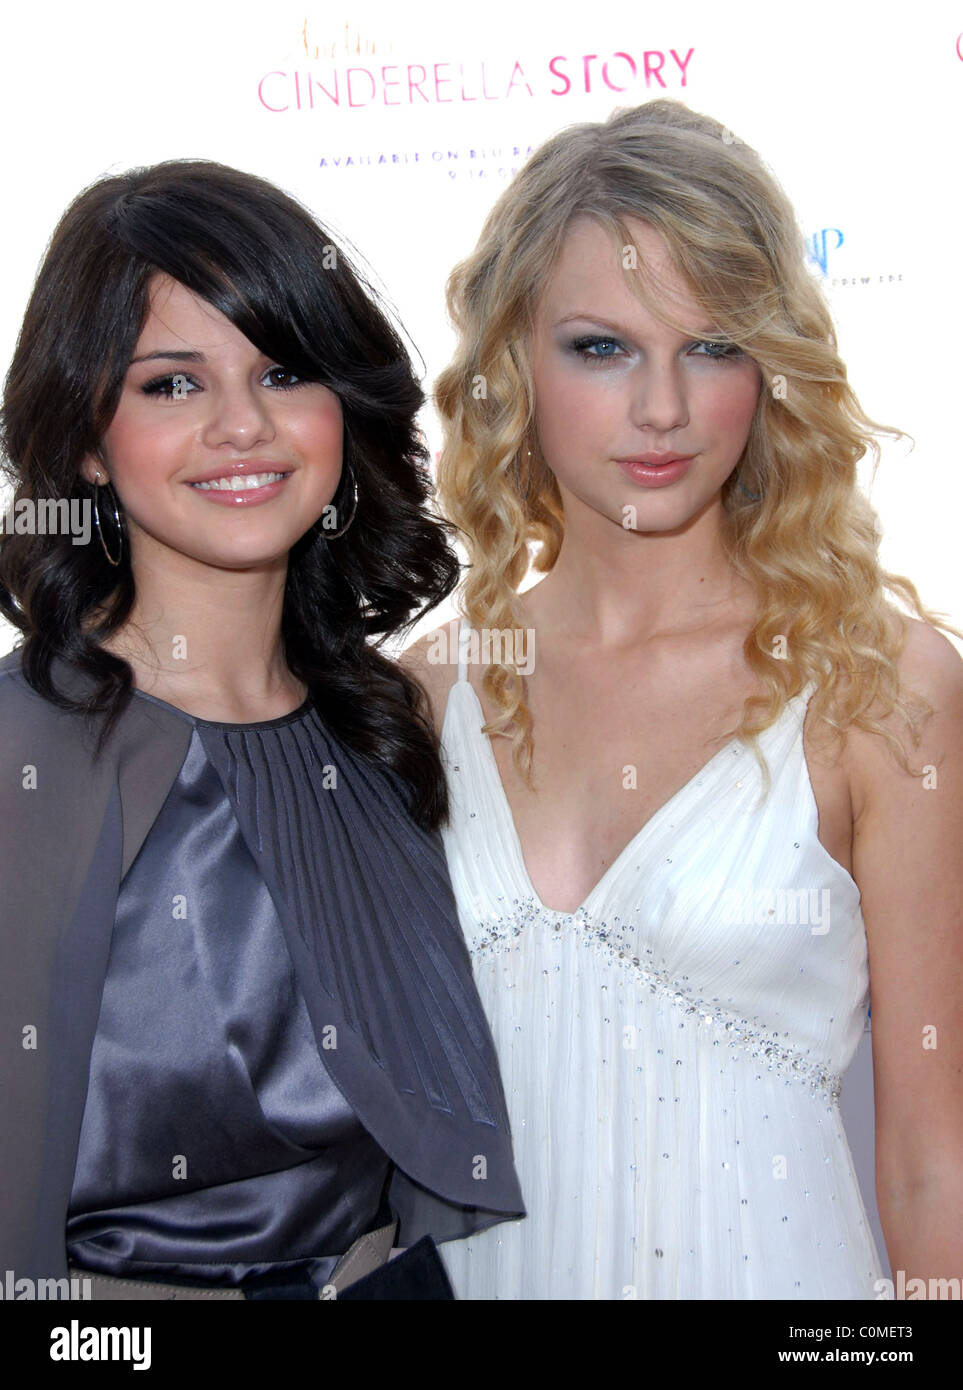 Selena Gomez and Taylor SwiftThe Premiere of 'Another Cinderella Story'  held at The Grove - Arrivals Los Angeles, California Stock Photo - Alamy